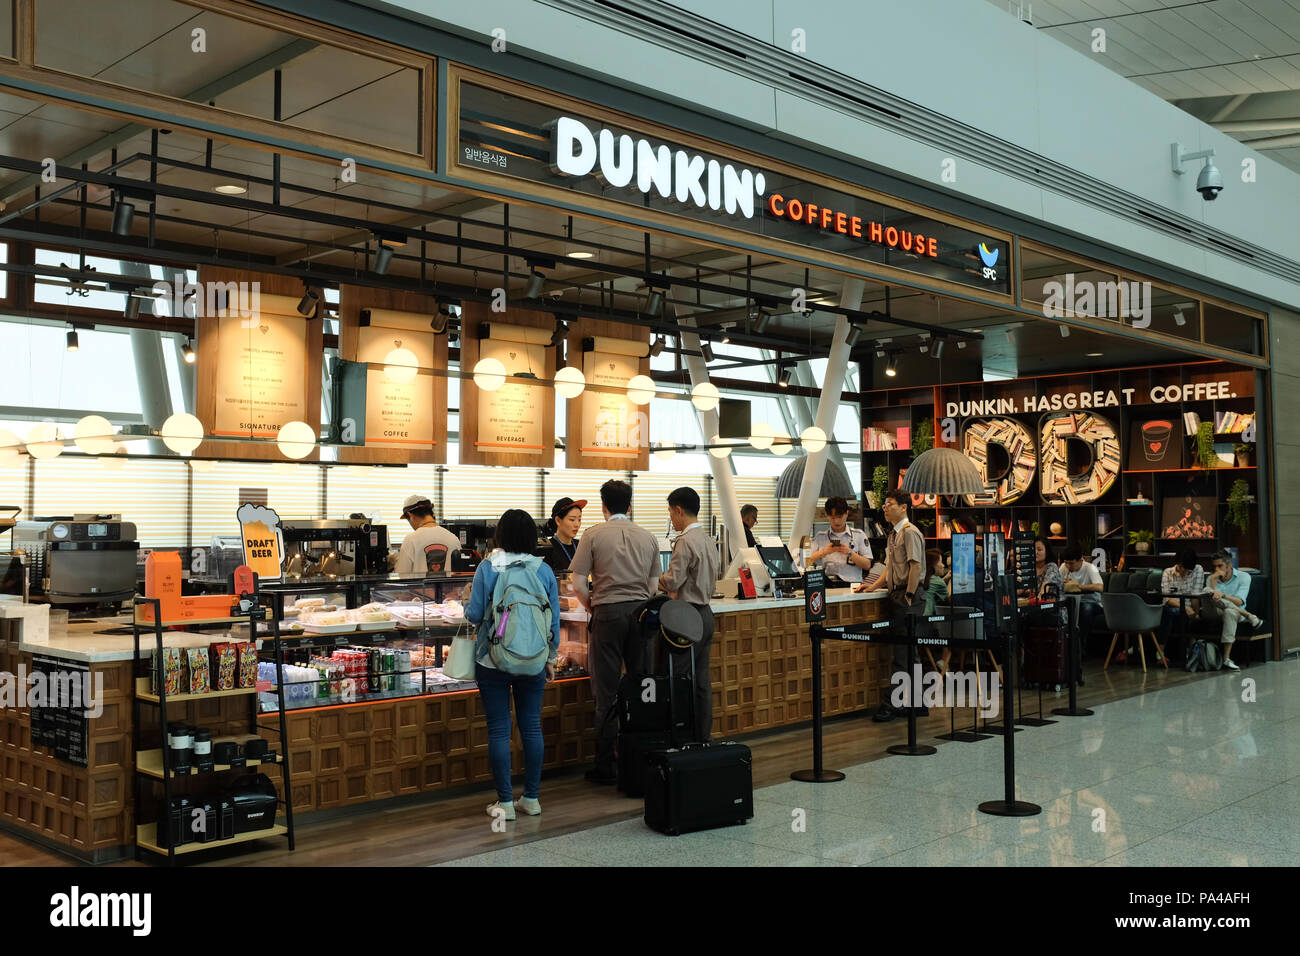 Dunkin' Coffee House at Incheon Airport in Seoul, South Korea. Stock Photo